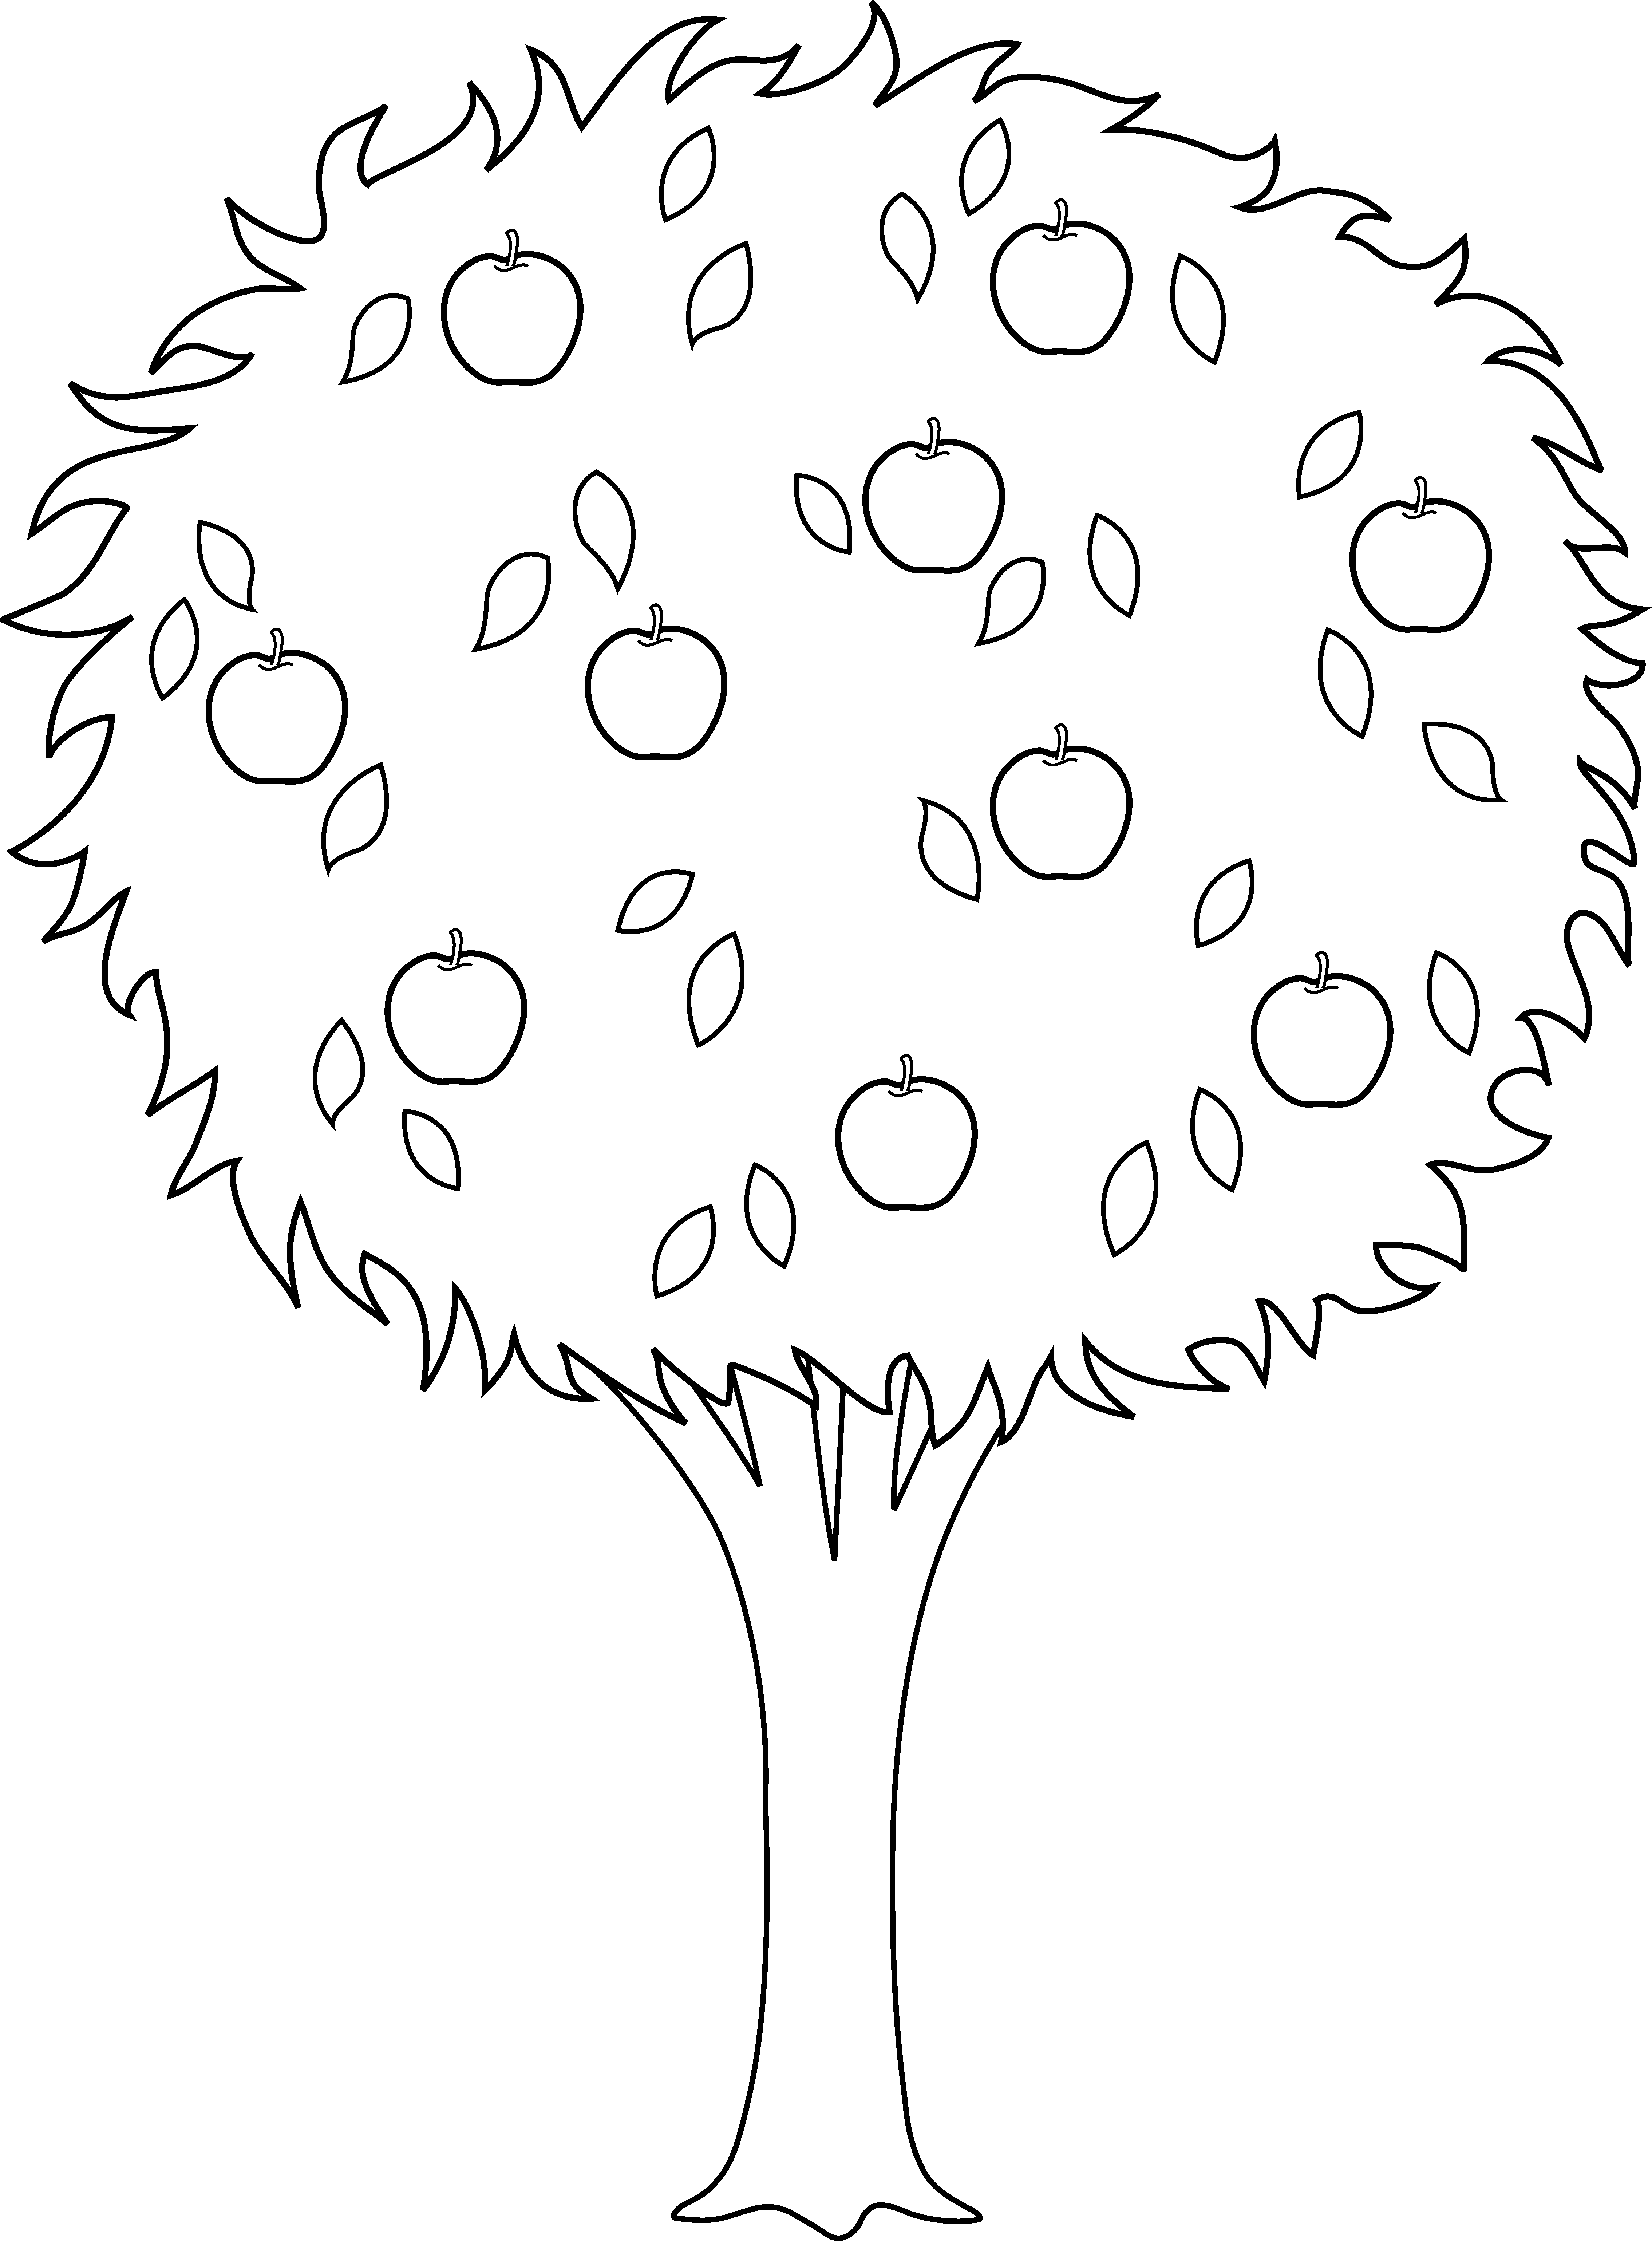 Free Outline Of Trees, Download Free Outline Of Trees png ...